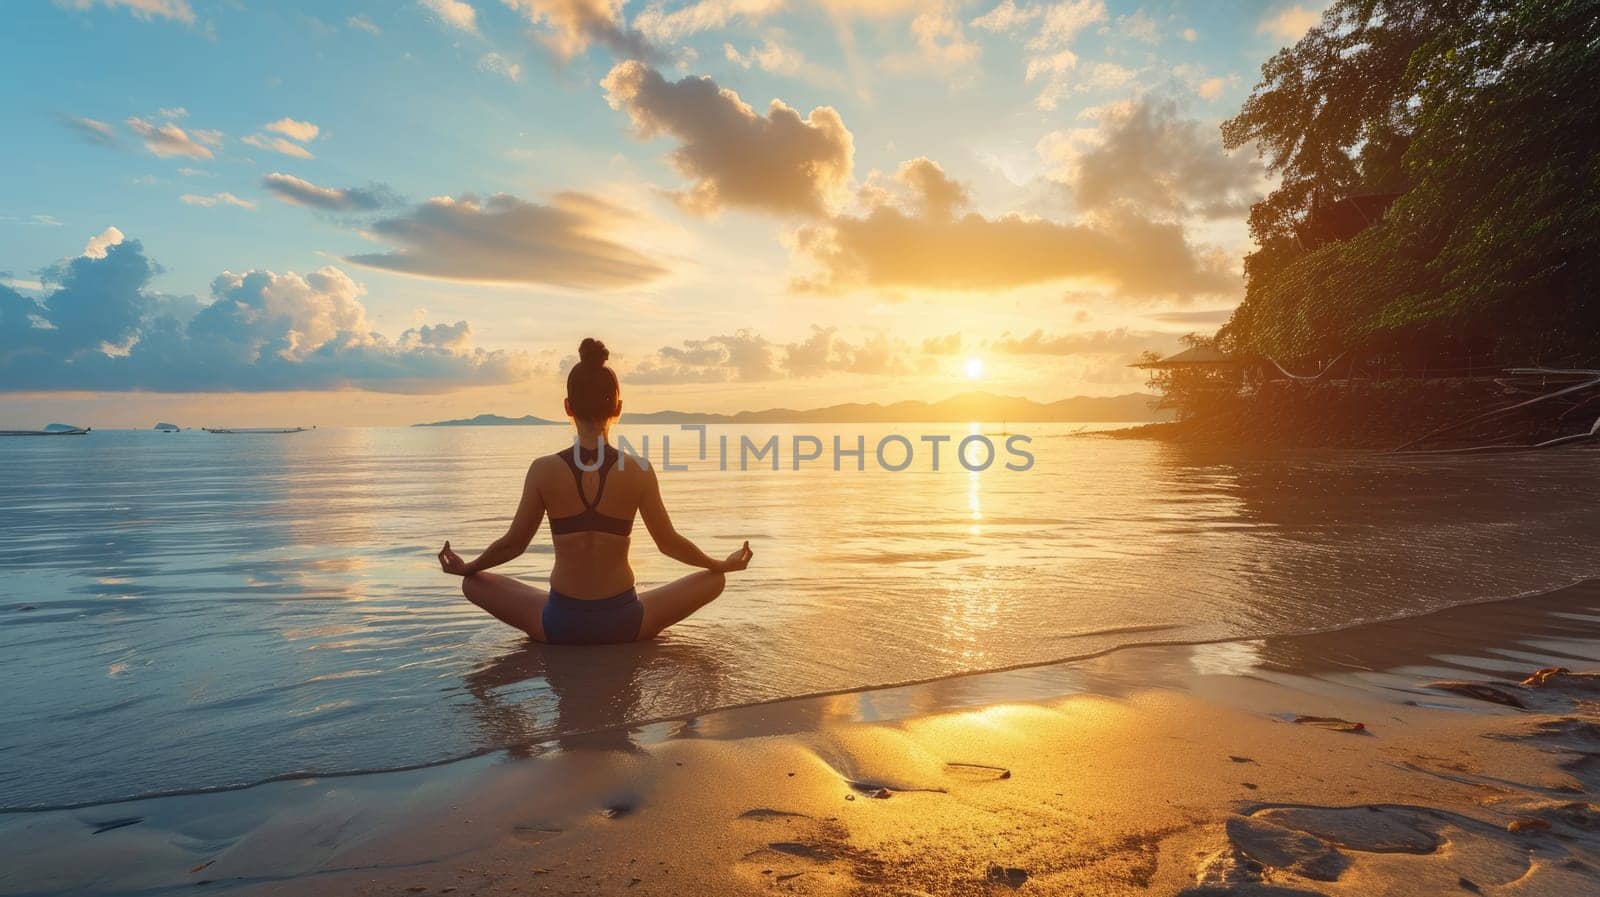 A tranquil yoga session on a beach at sunrise. Resplendent. by biancoblue